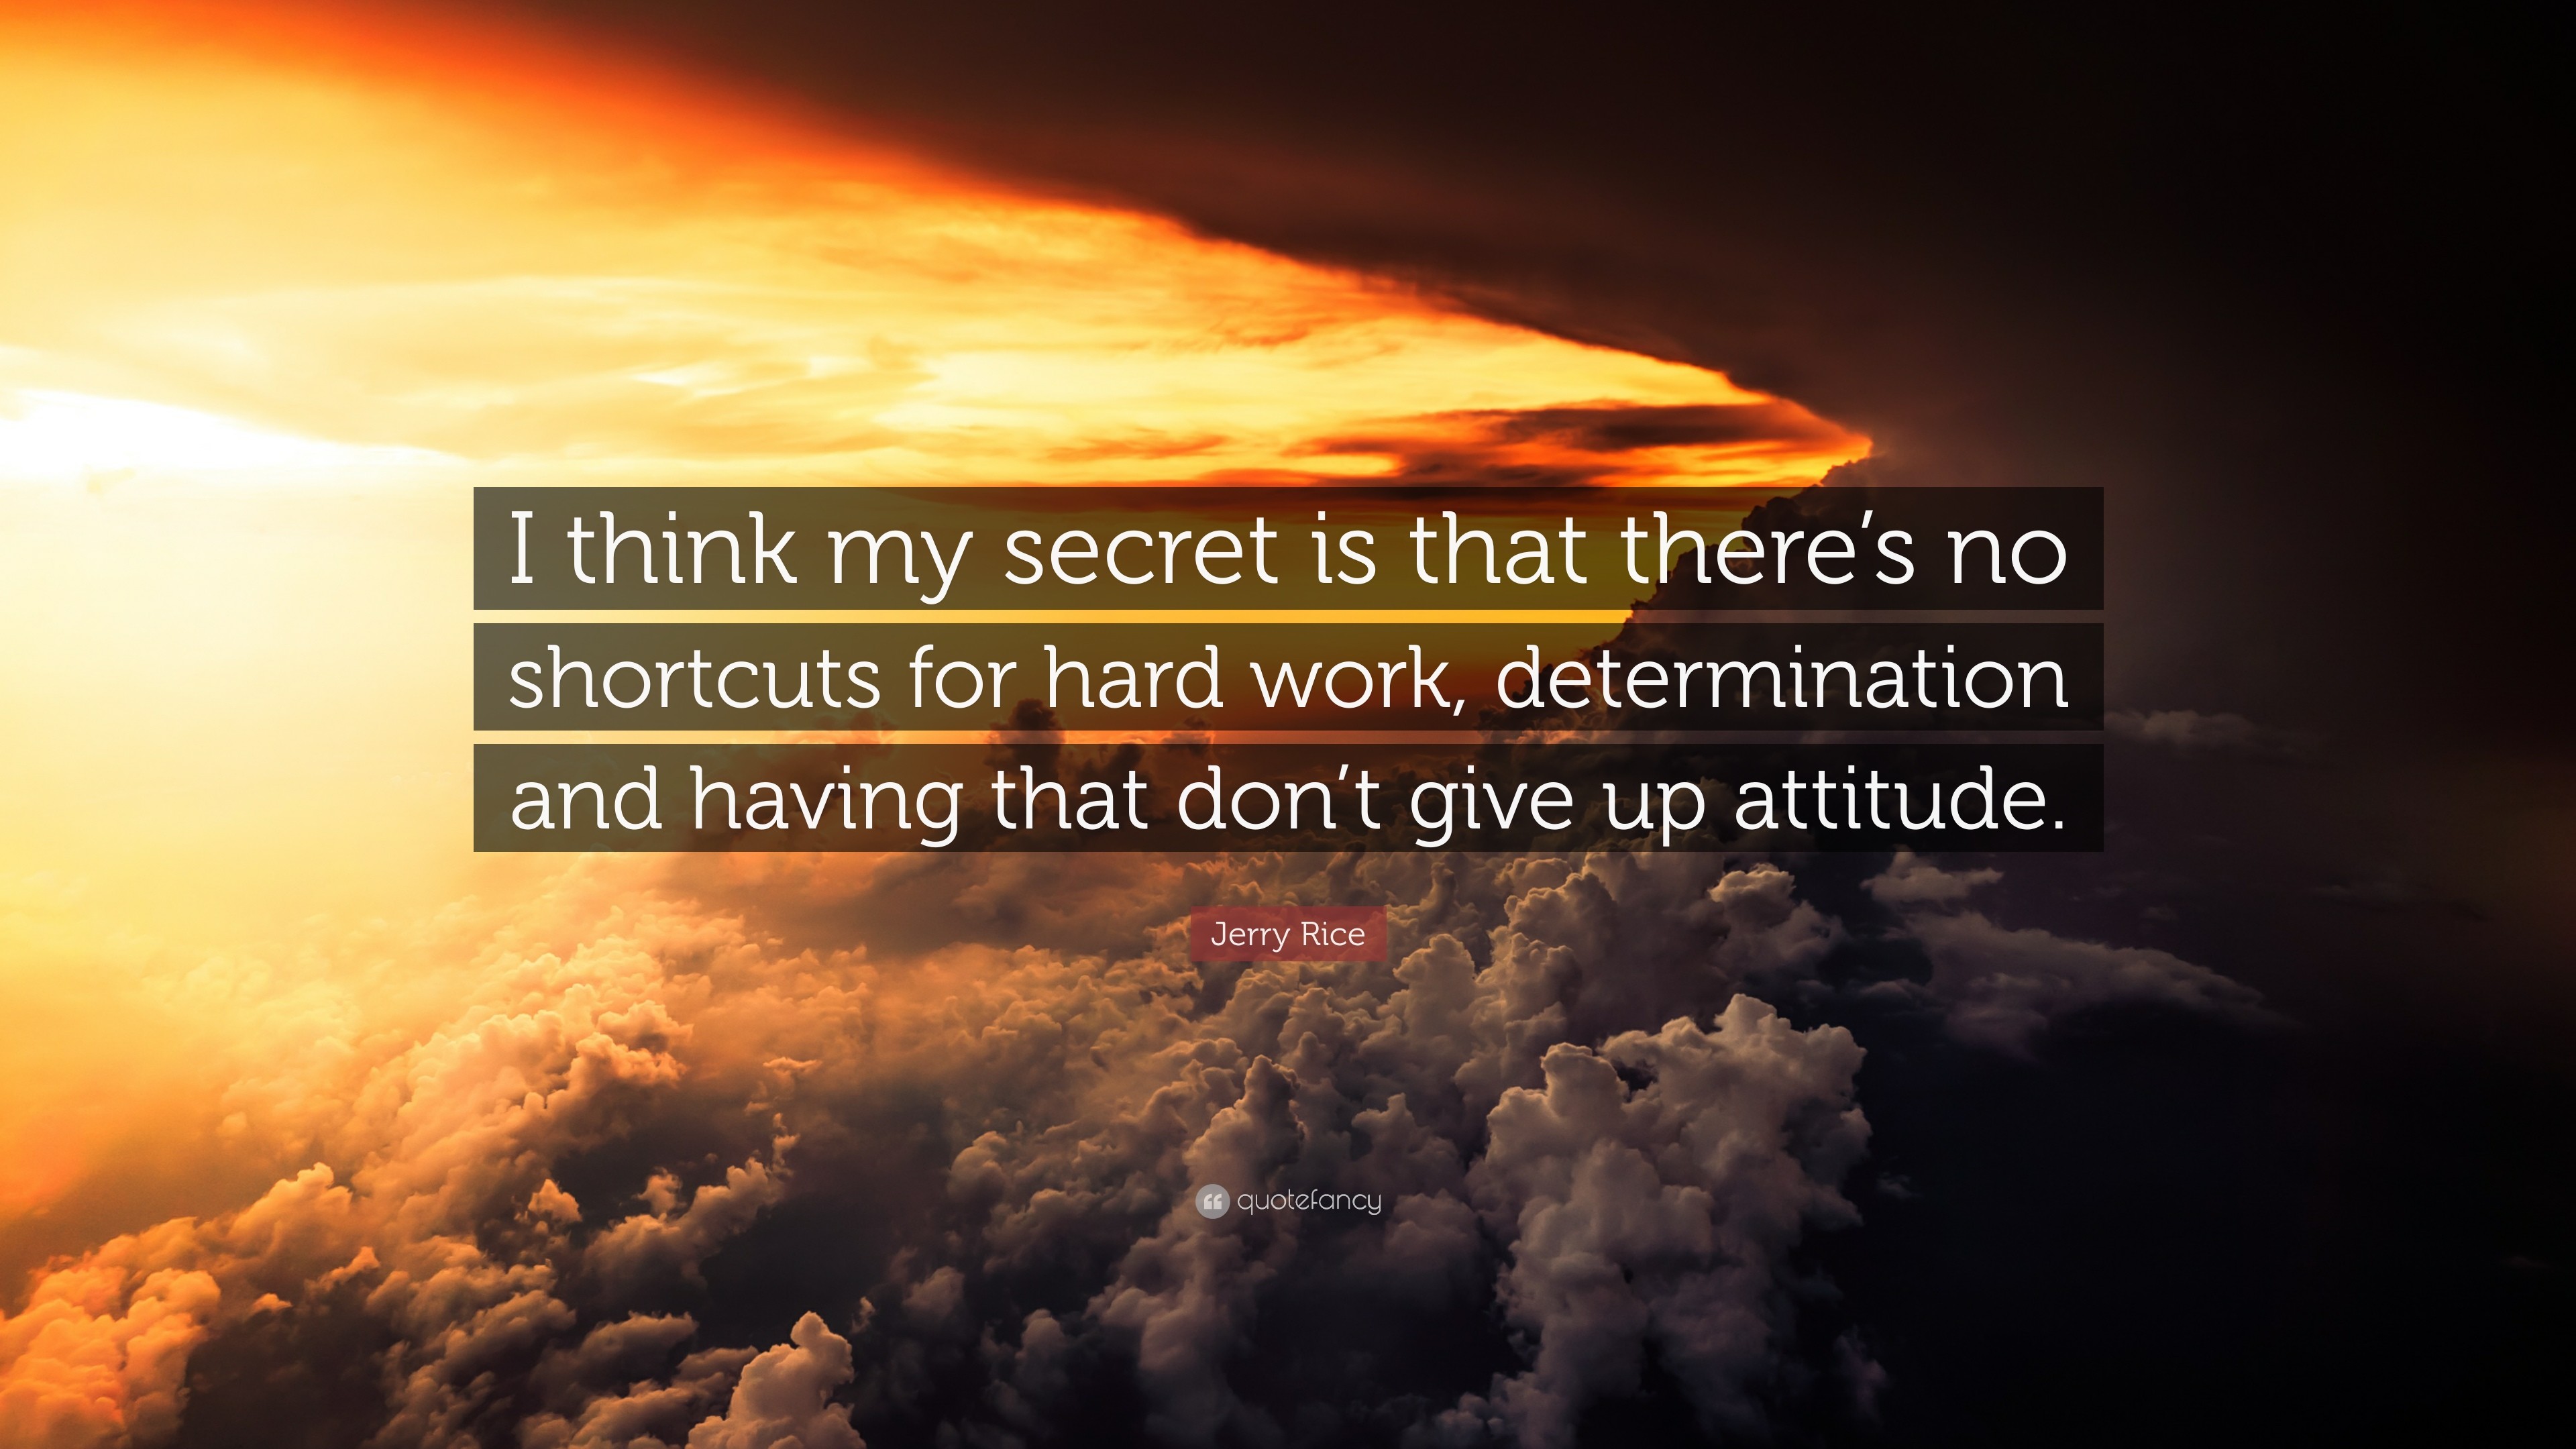 Jerry Rice Quote: “I think my secret is that there's no shortcuts for hard